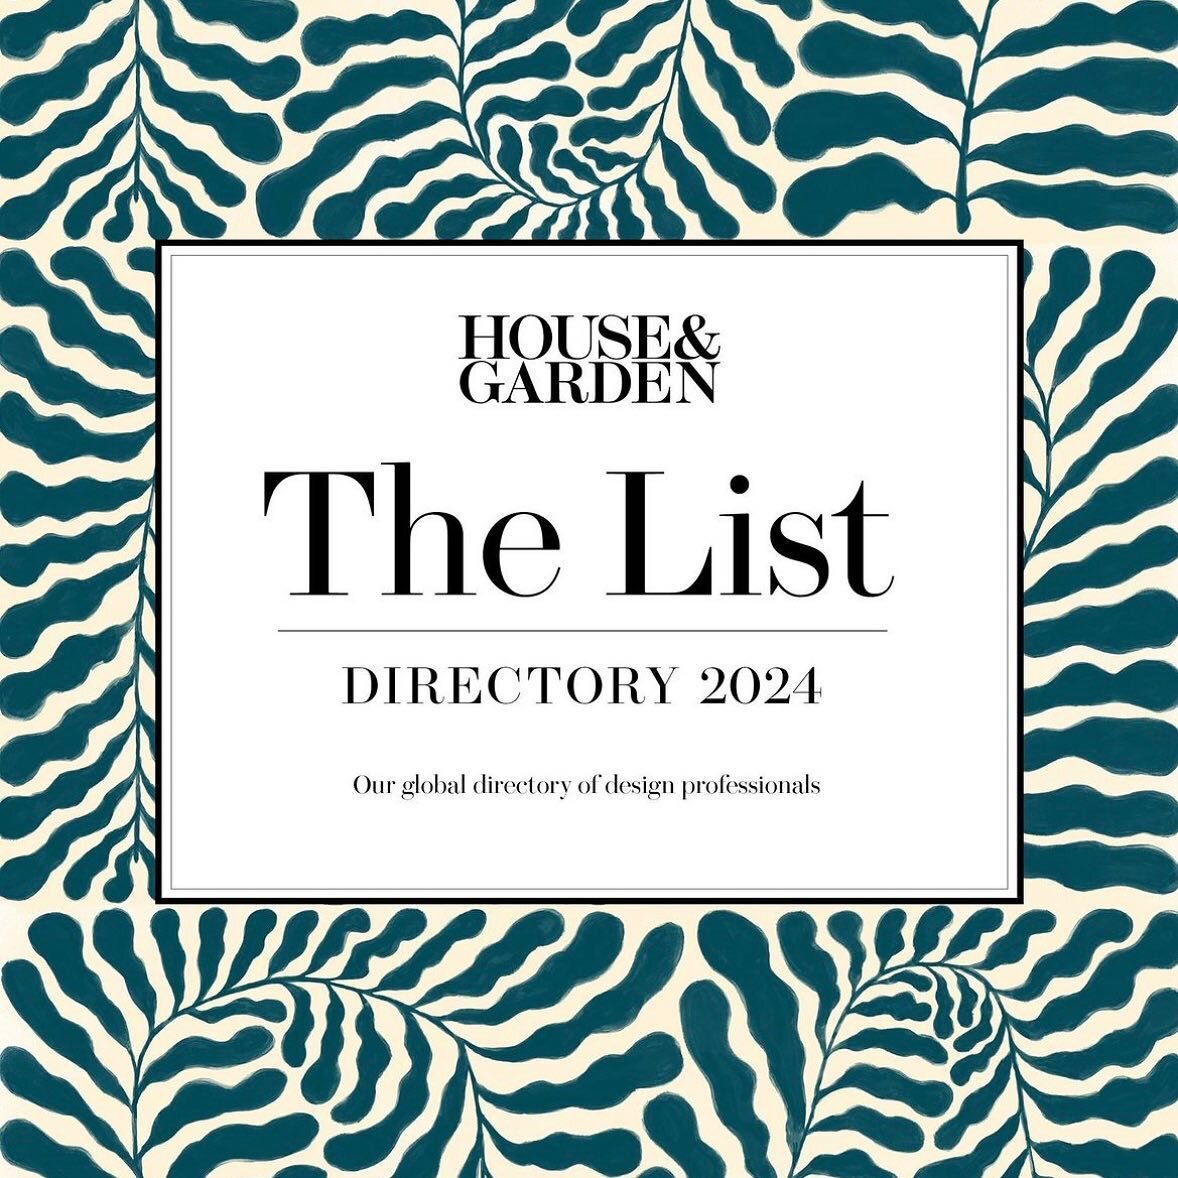 Welcome 2024! Back to our drawing boards. We&rsquo;re making lists. And we&rsquo;re on The List! @thelistbyhouseandgarden @houseandgardenuk 

#thelistbyhouseandgarden #houseandgarden #interiors #interiordesign #interiordesigner #interiorinspiration  